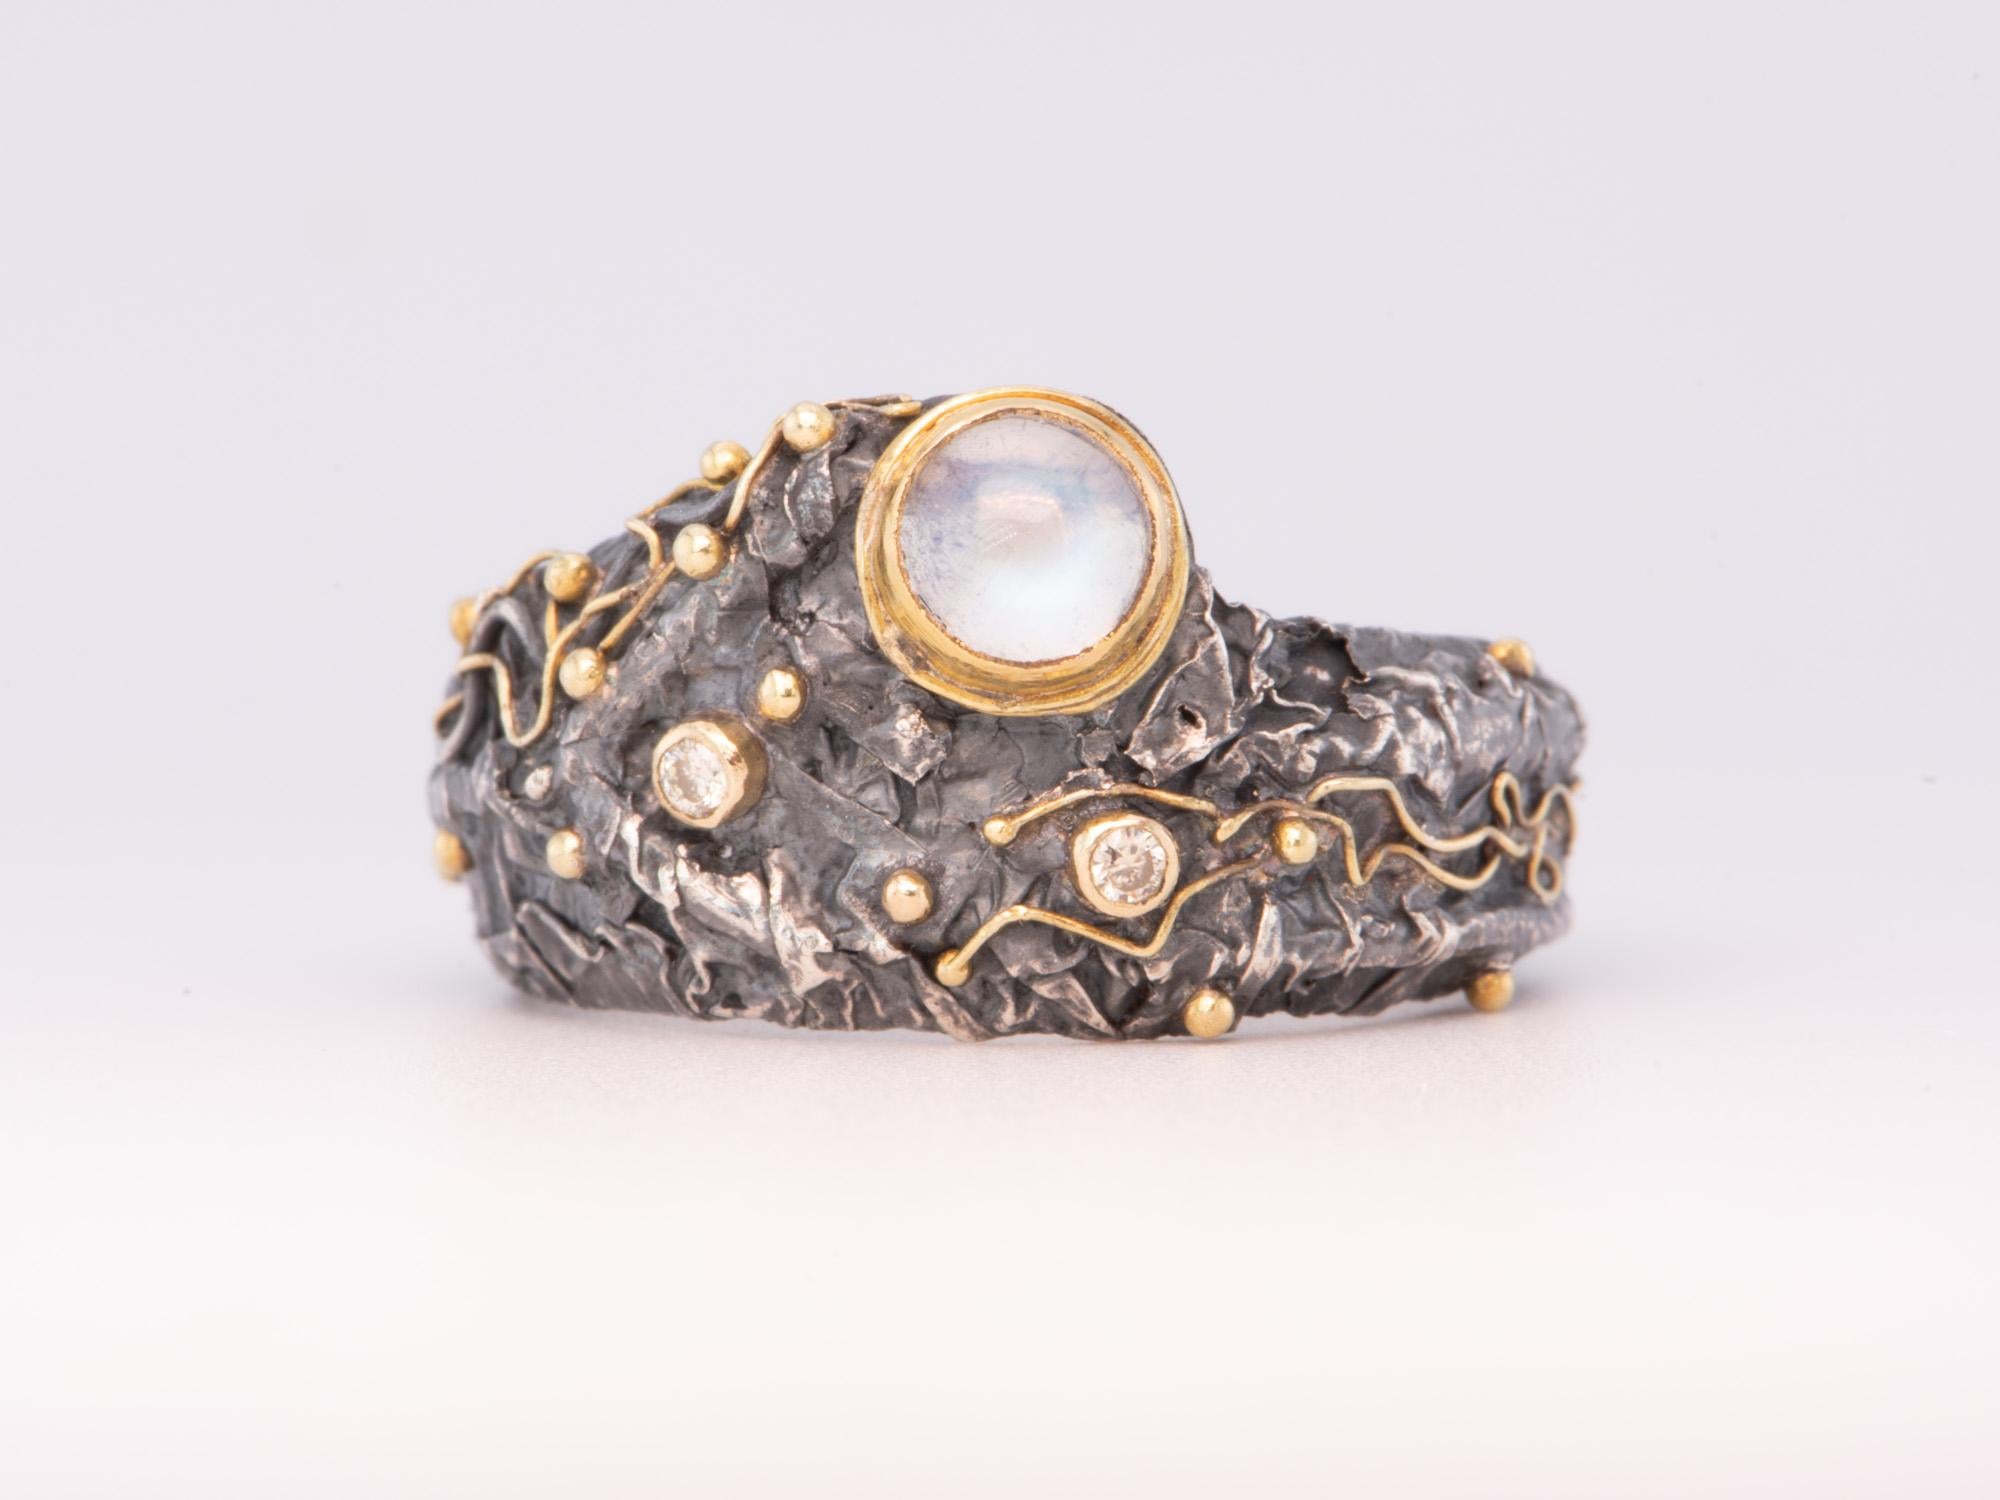 Unique Textured Wide Band Ring Moonstone Diamonds Sterling Silver 18K Gold R6645 In New Condition For Sale In Osprey, FL